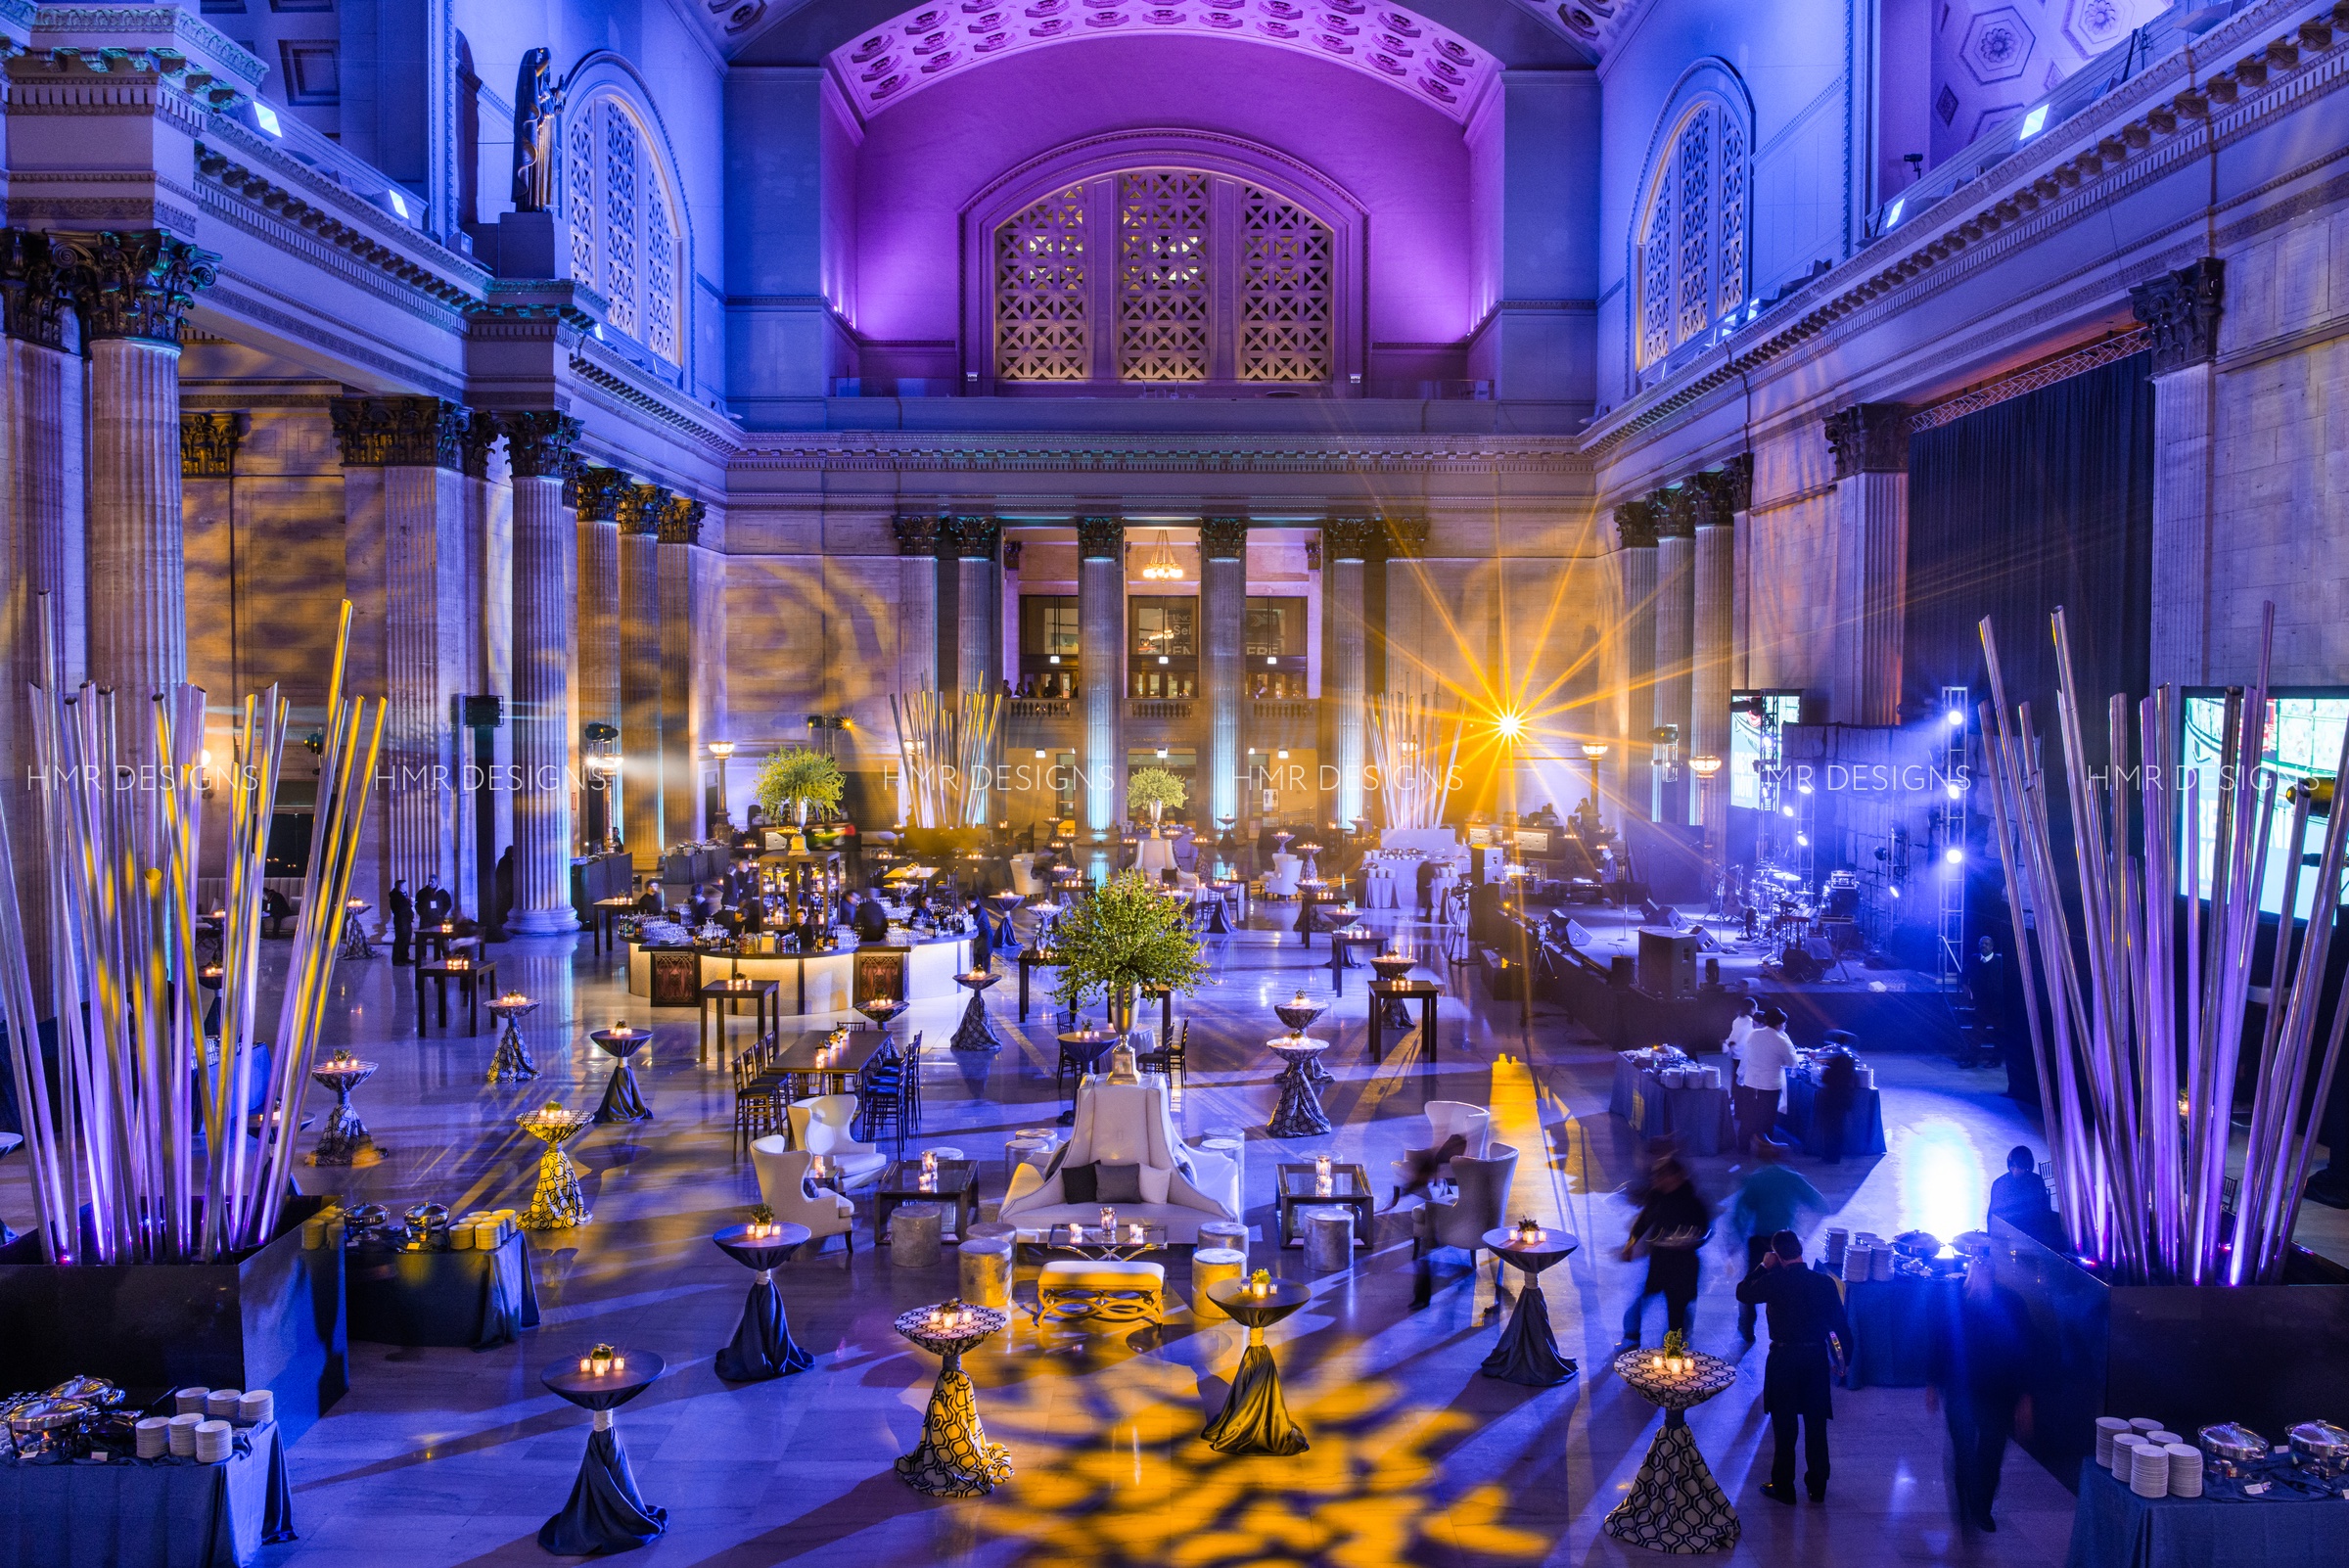 Stunning corporate event decor at Union Station Chicago by HMR Designs